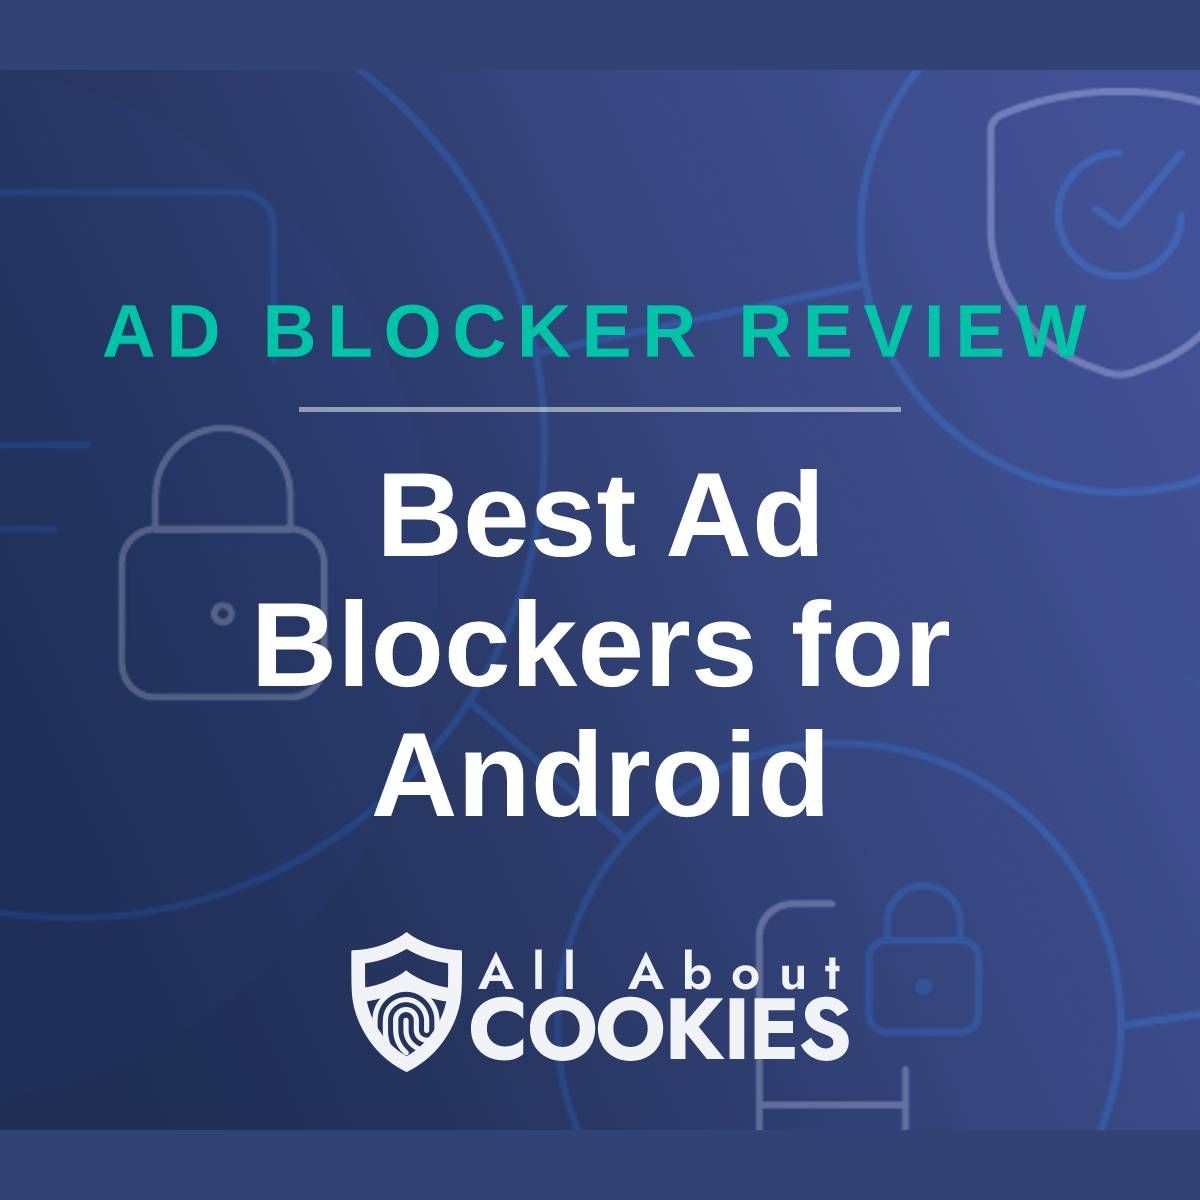 A blue background with images of locks and shields with the text &quot;Ad Blocker Review Best Ad Blockers for Android&quot; and the All About Cookies logo. 